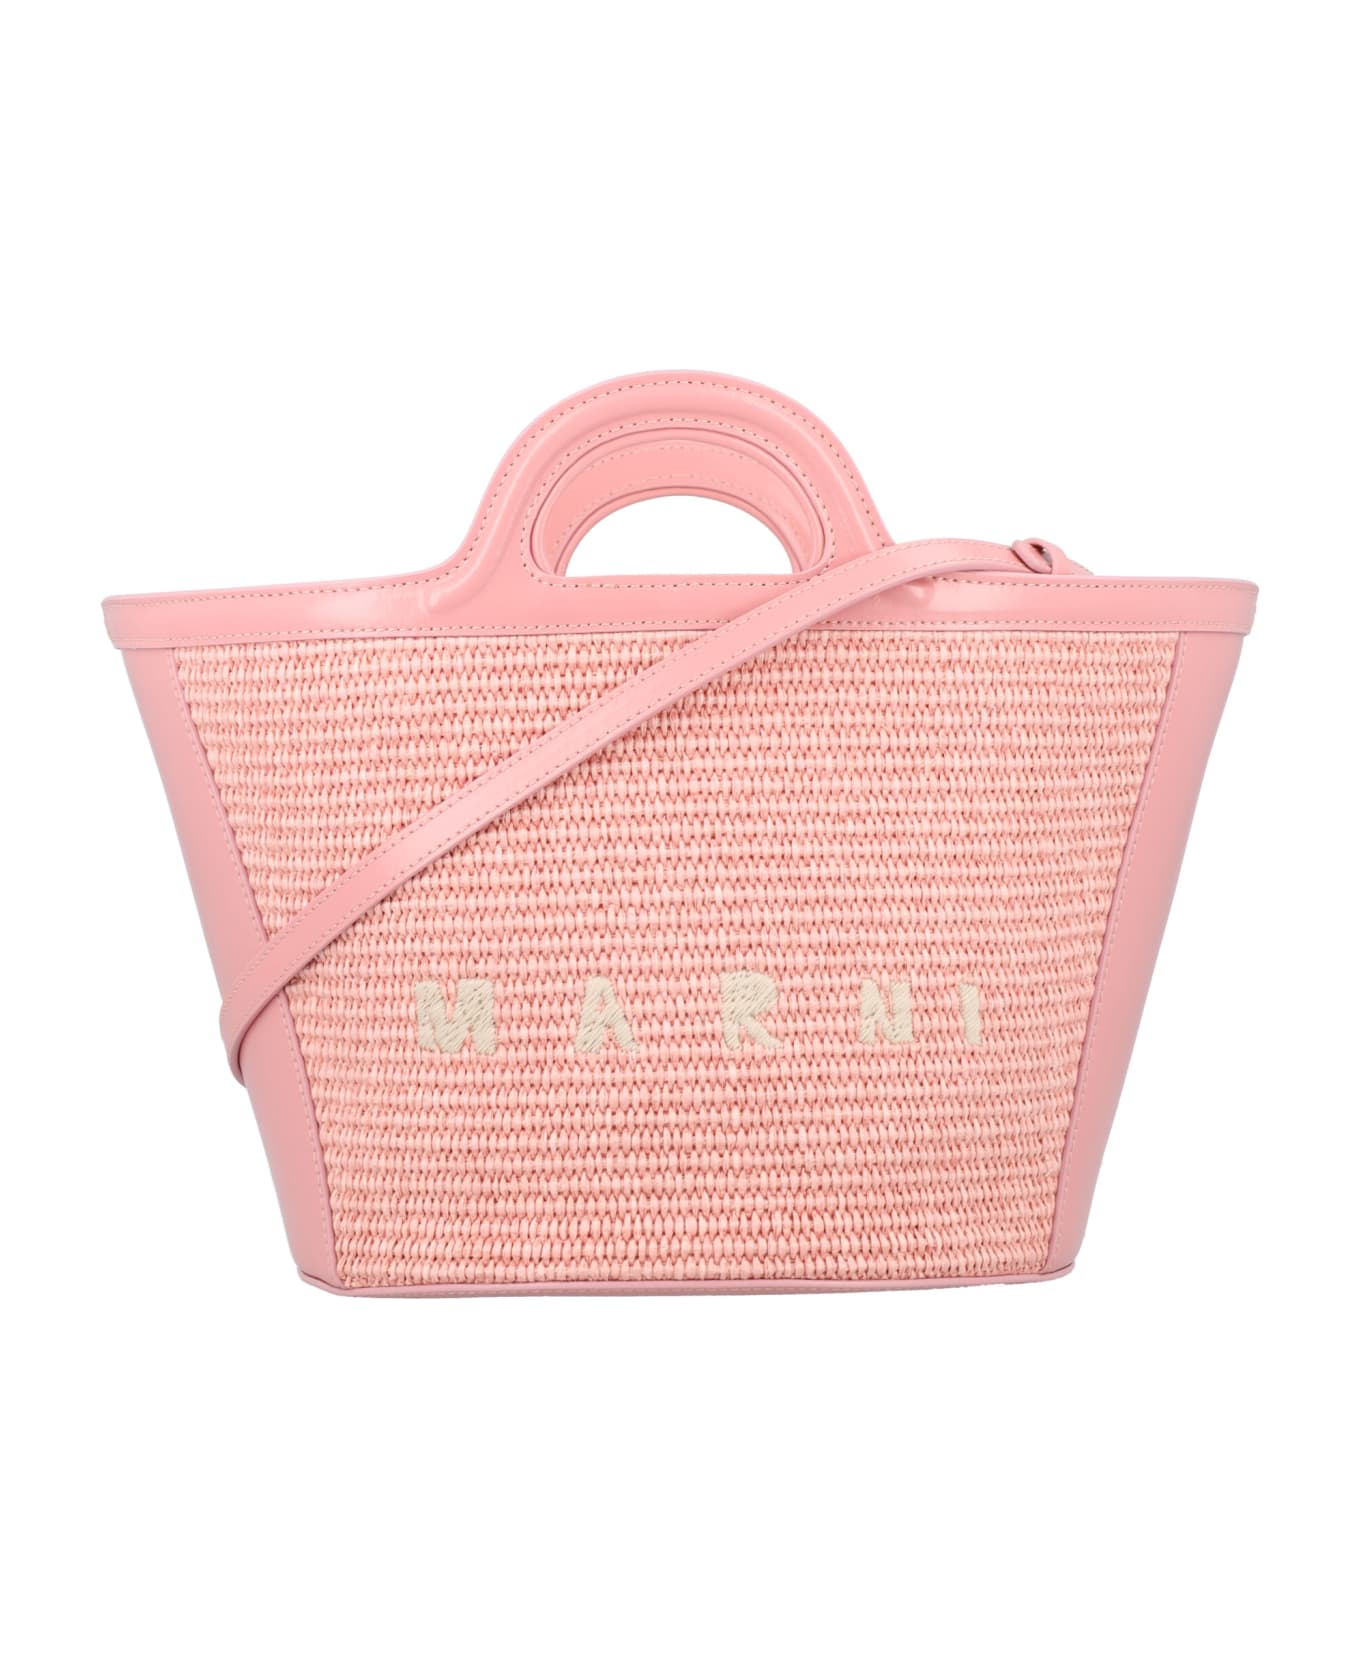 Marni Tropicalia Micro Bag In Leather And Raffia - PALE PINK トートバッグ